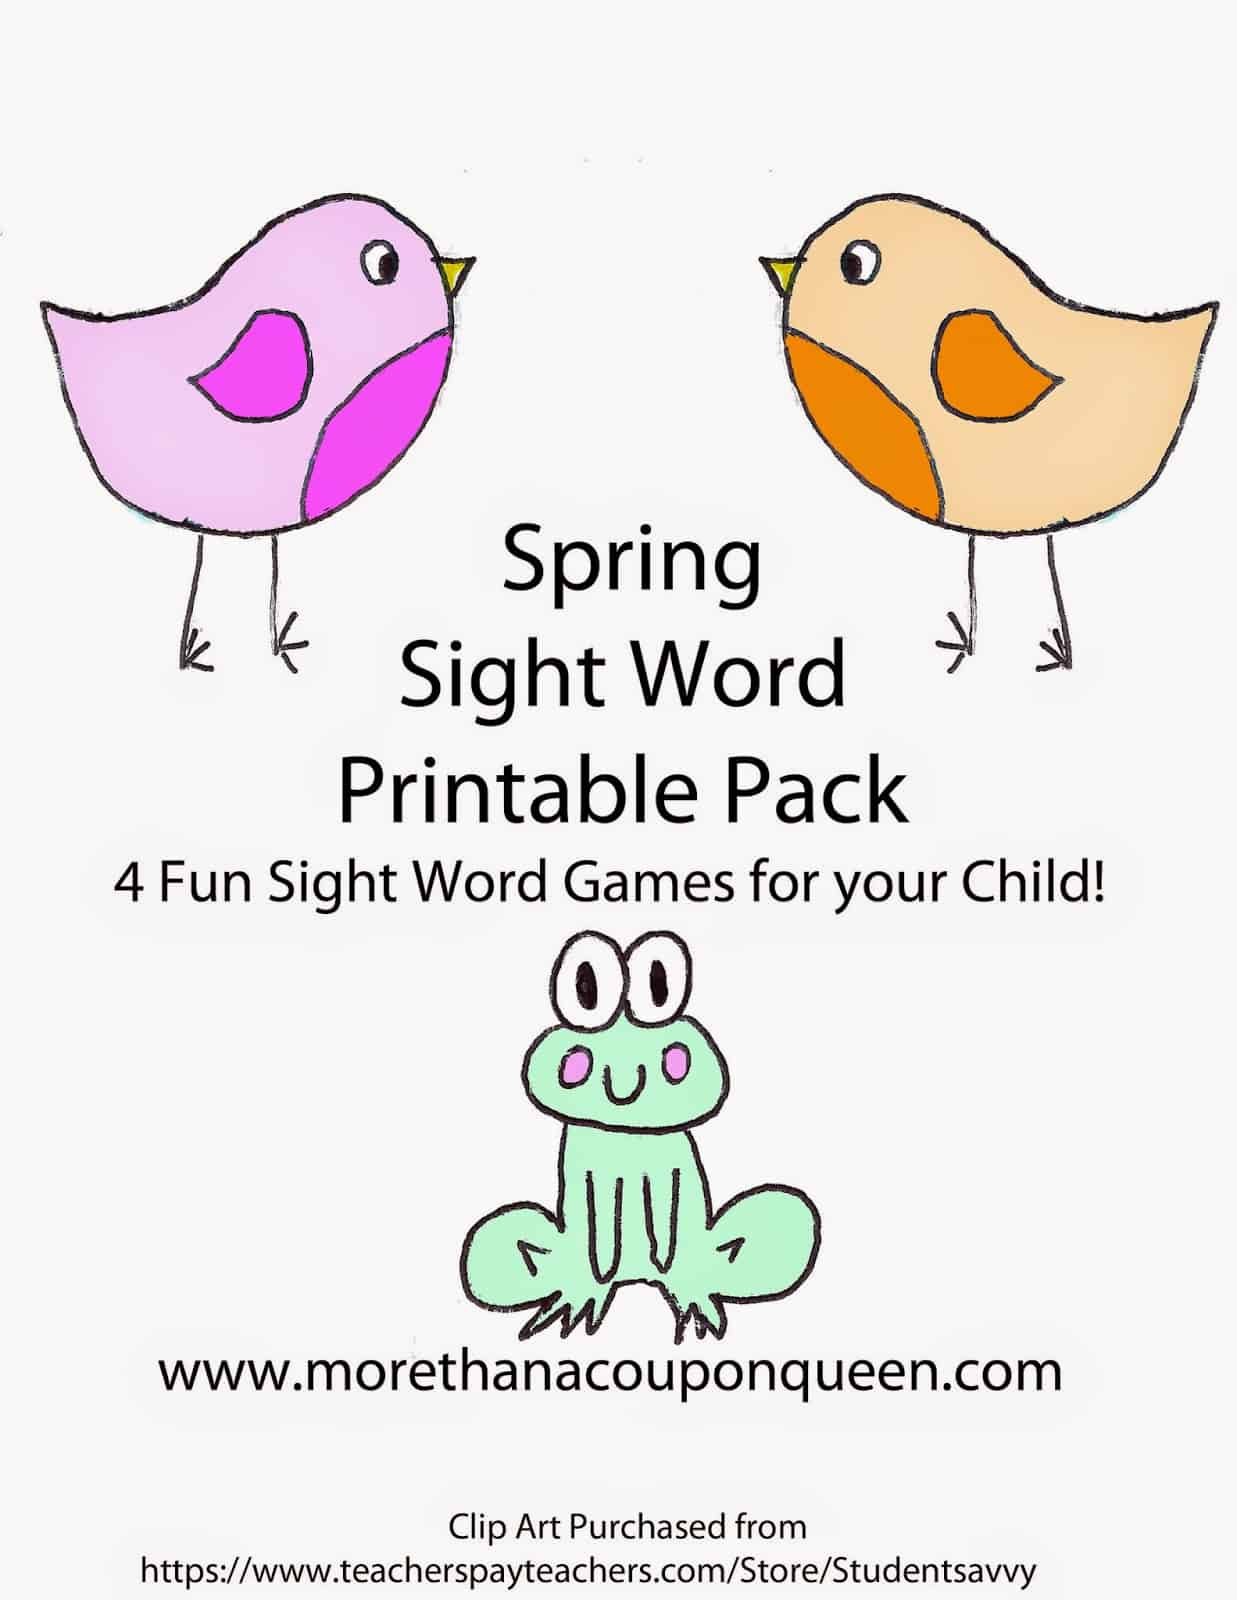 How to Teach Sight Words | Free Sight Word Printable Pack